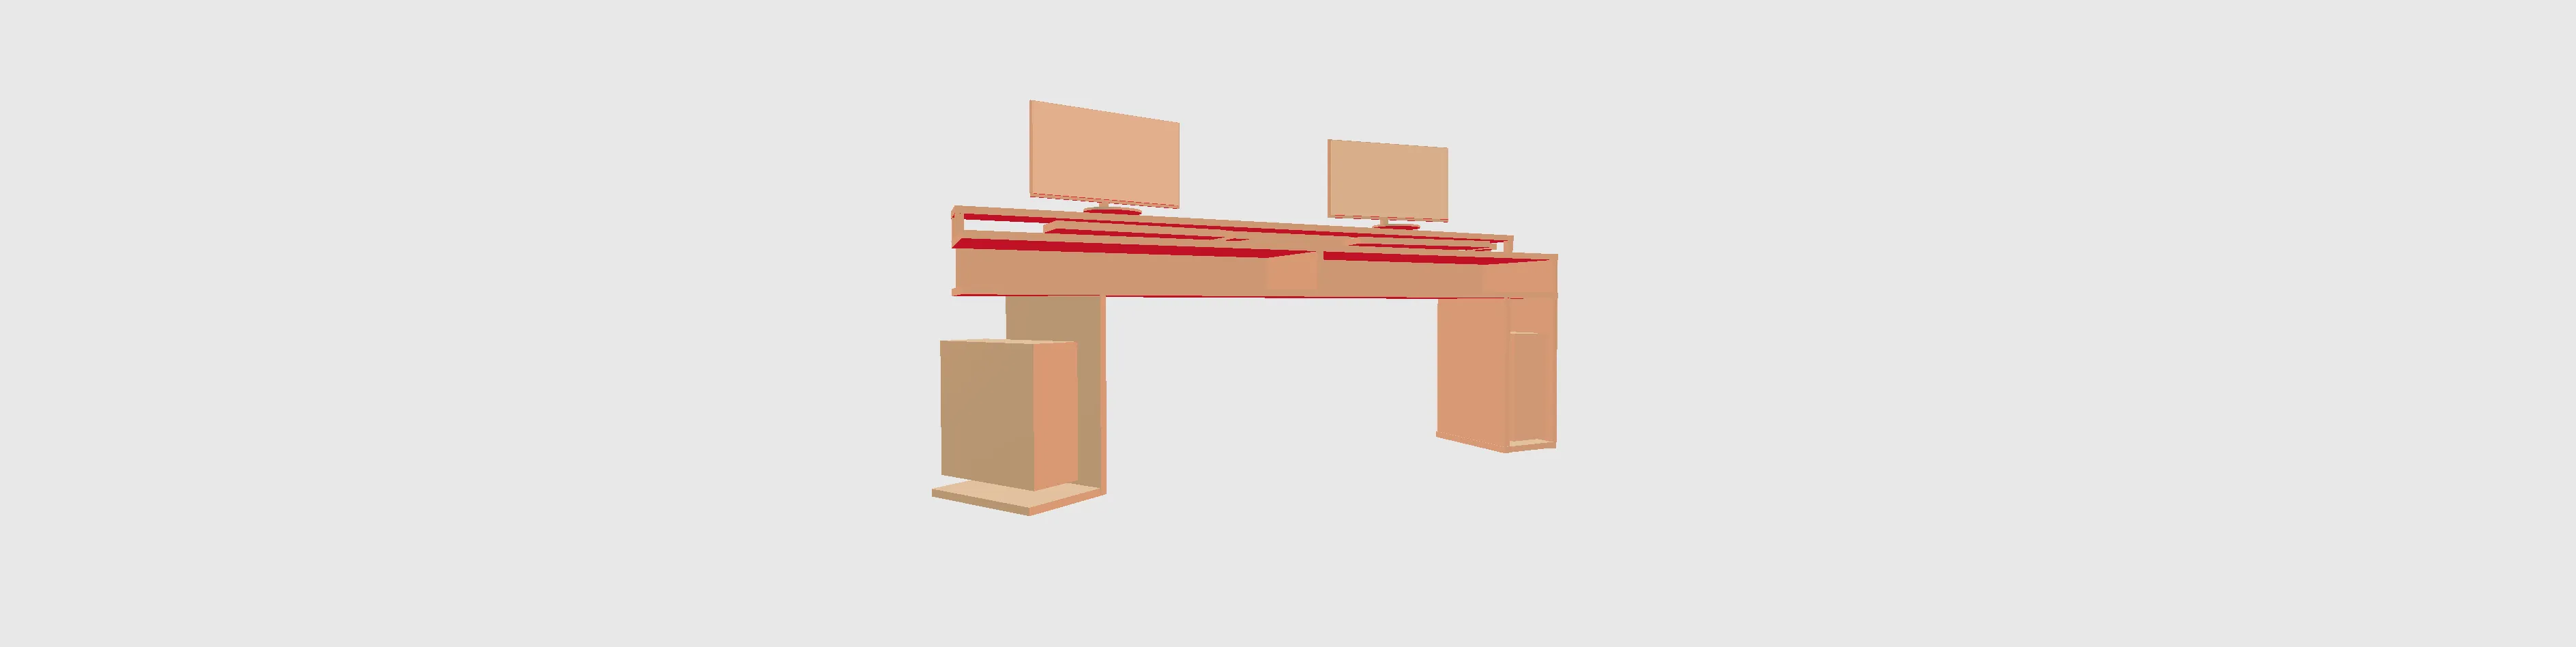 gaming table.fbx